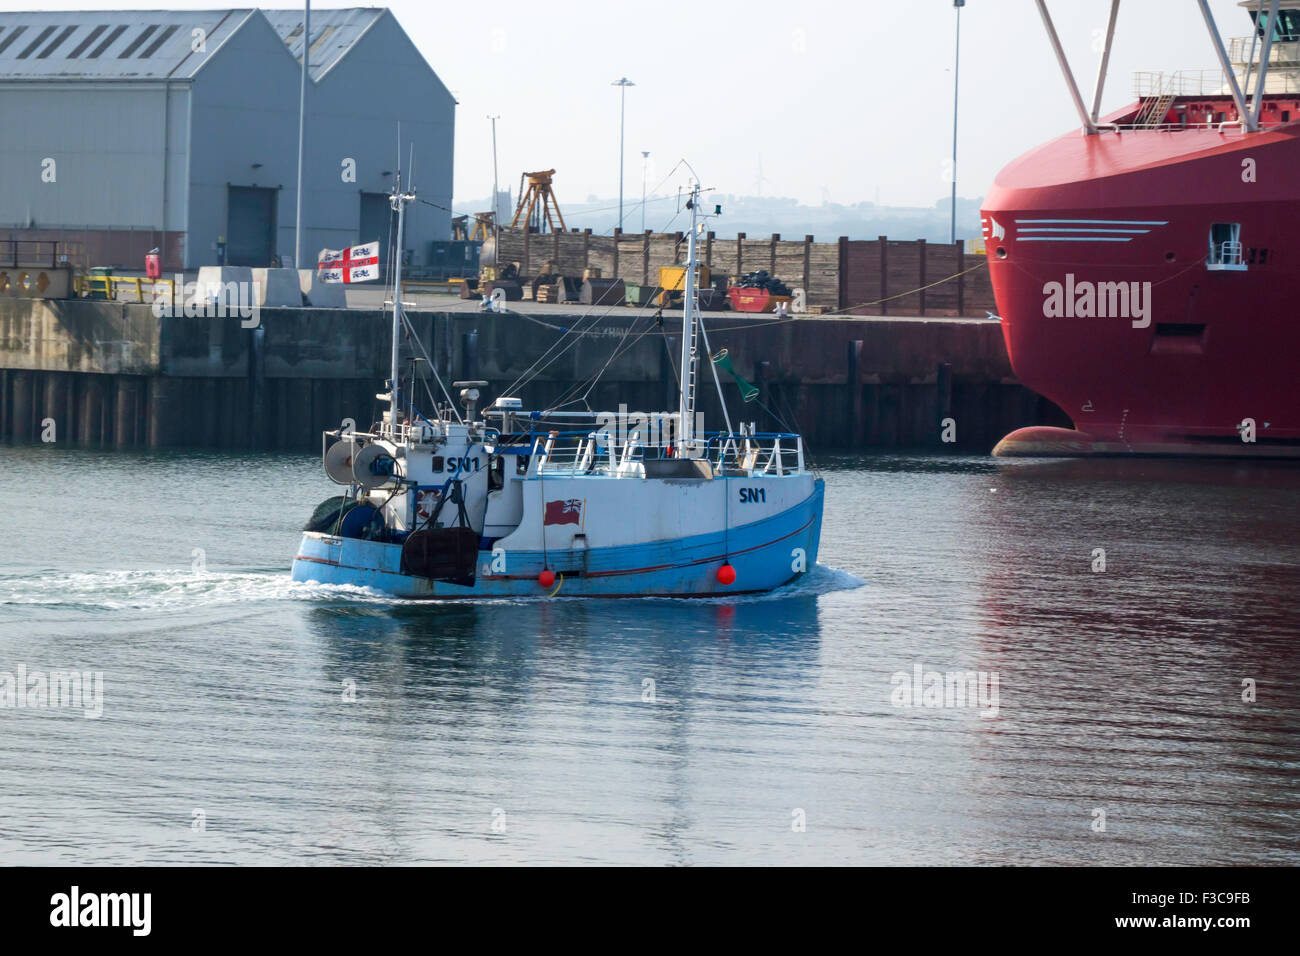 SN1 a small fishing trawler arriving in the Port of Hartlepool Co County Durham England UK Stock Photo